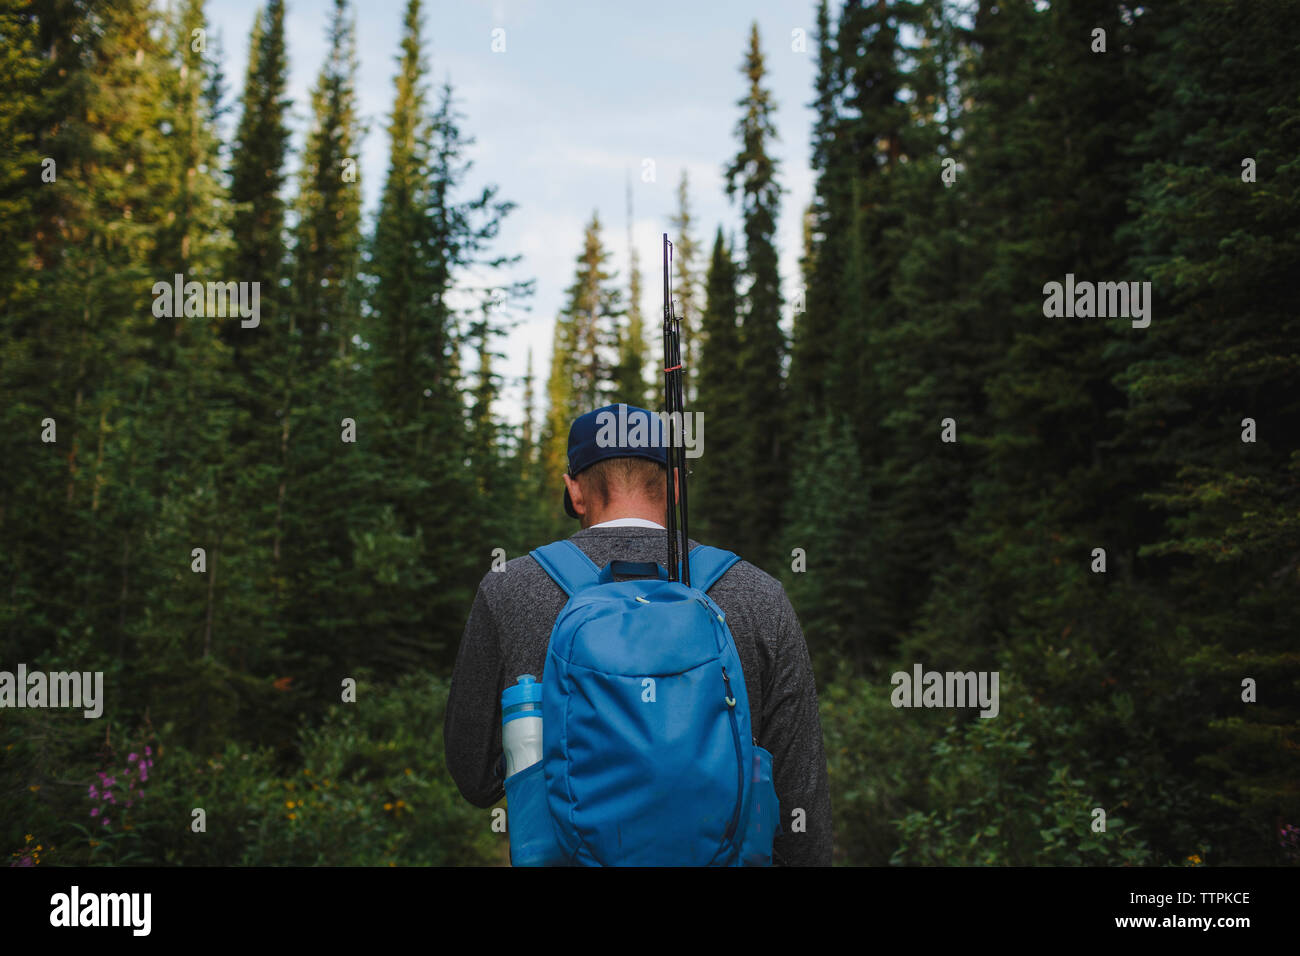 Rear view of hiker with backpack exploring forest Stock Photo